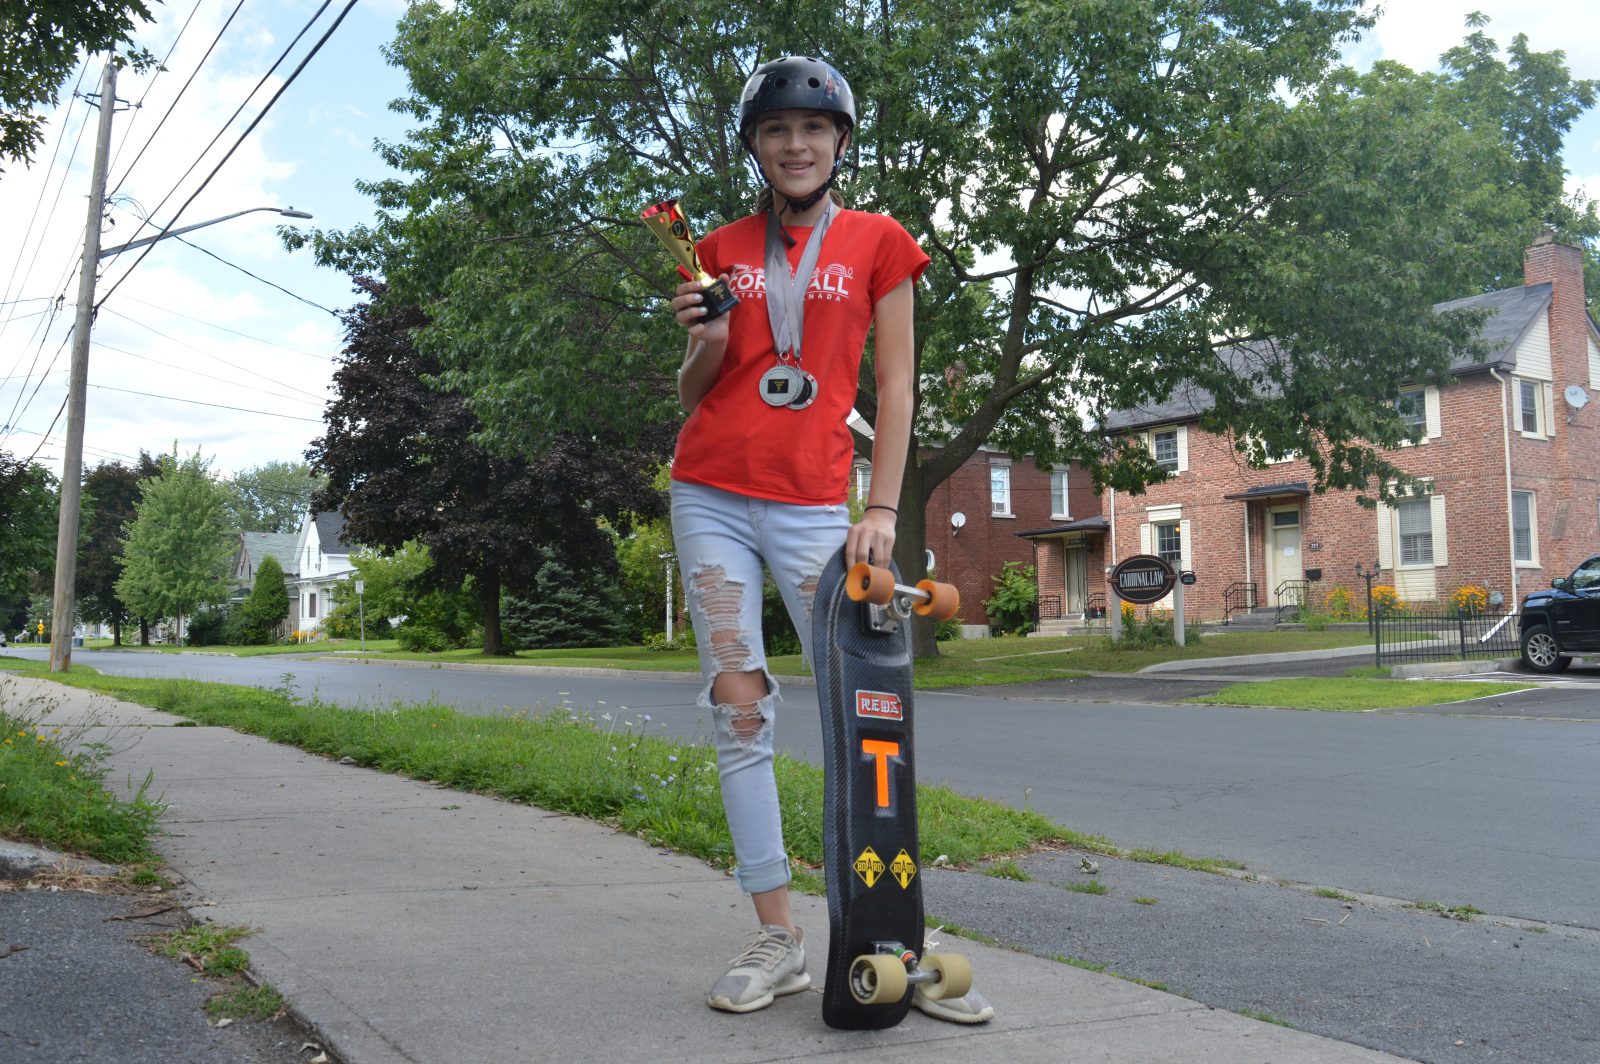 Local teen works to attend World Slalom Skateboarding Championship